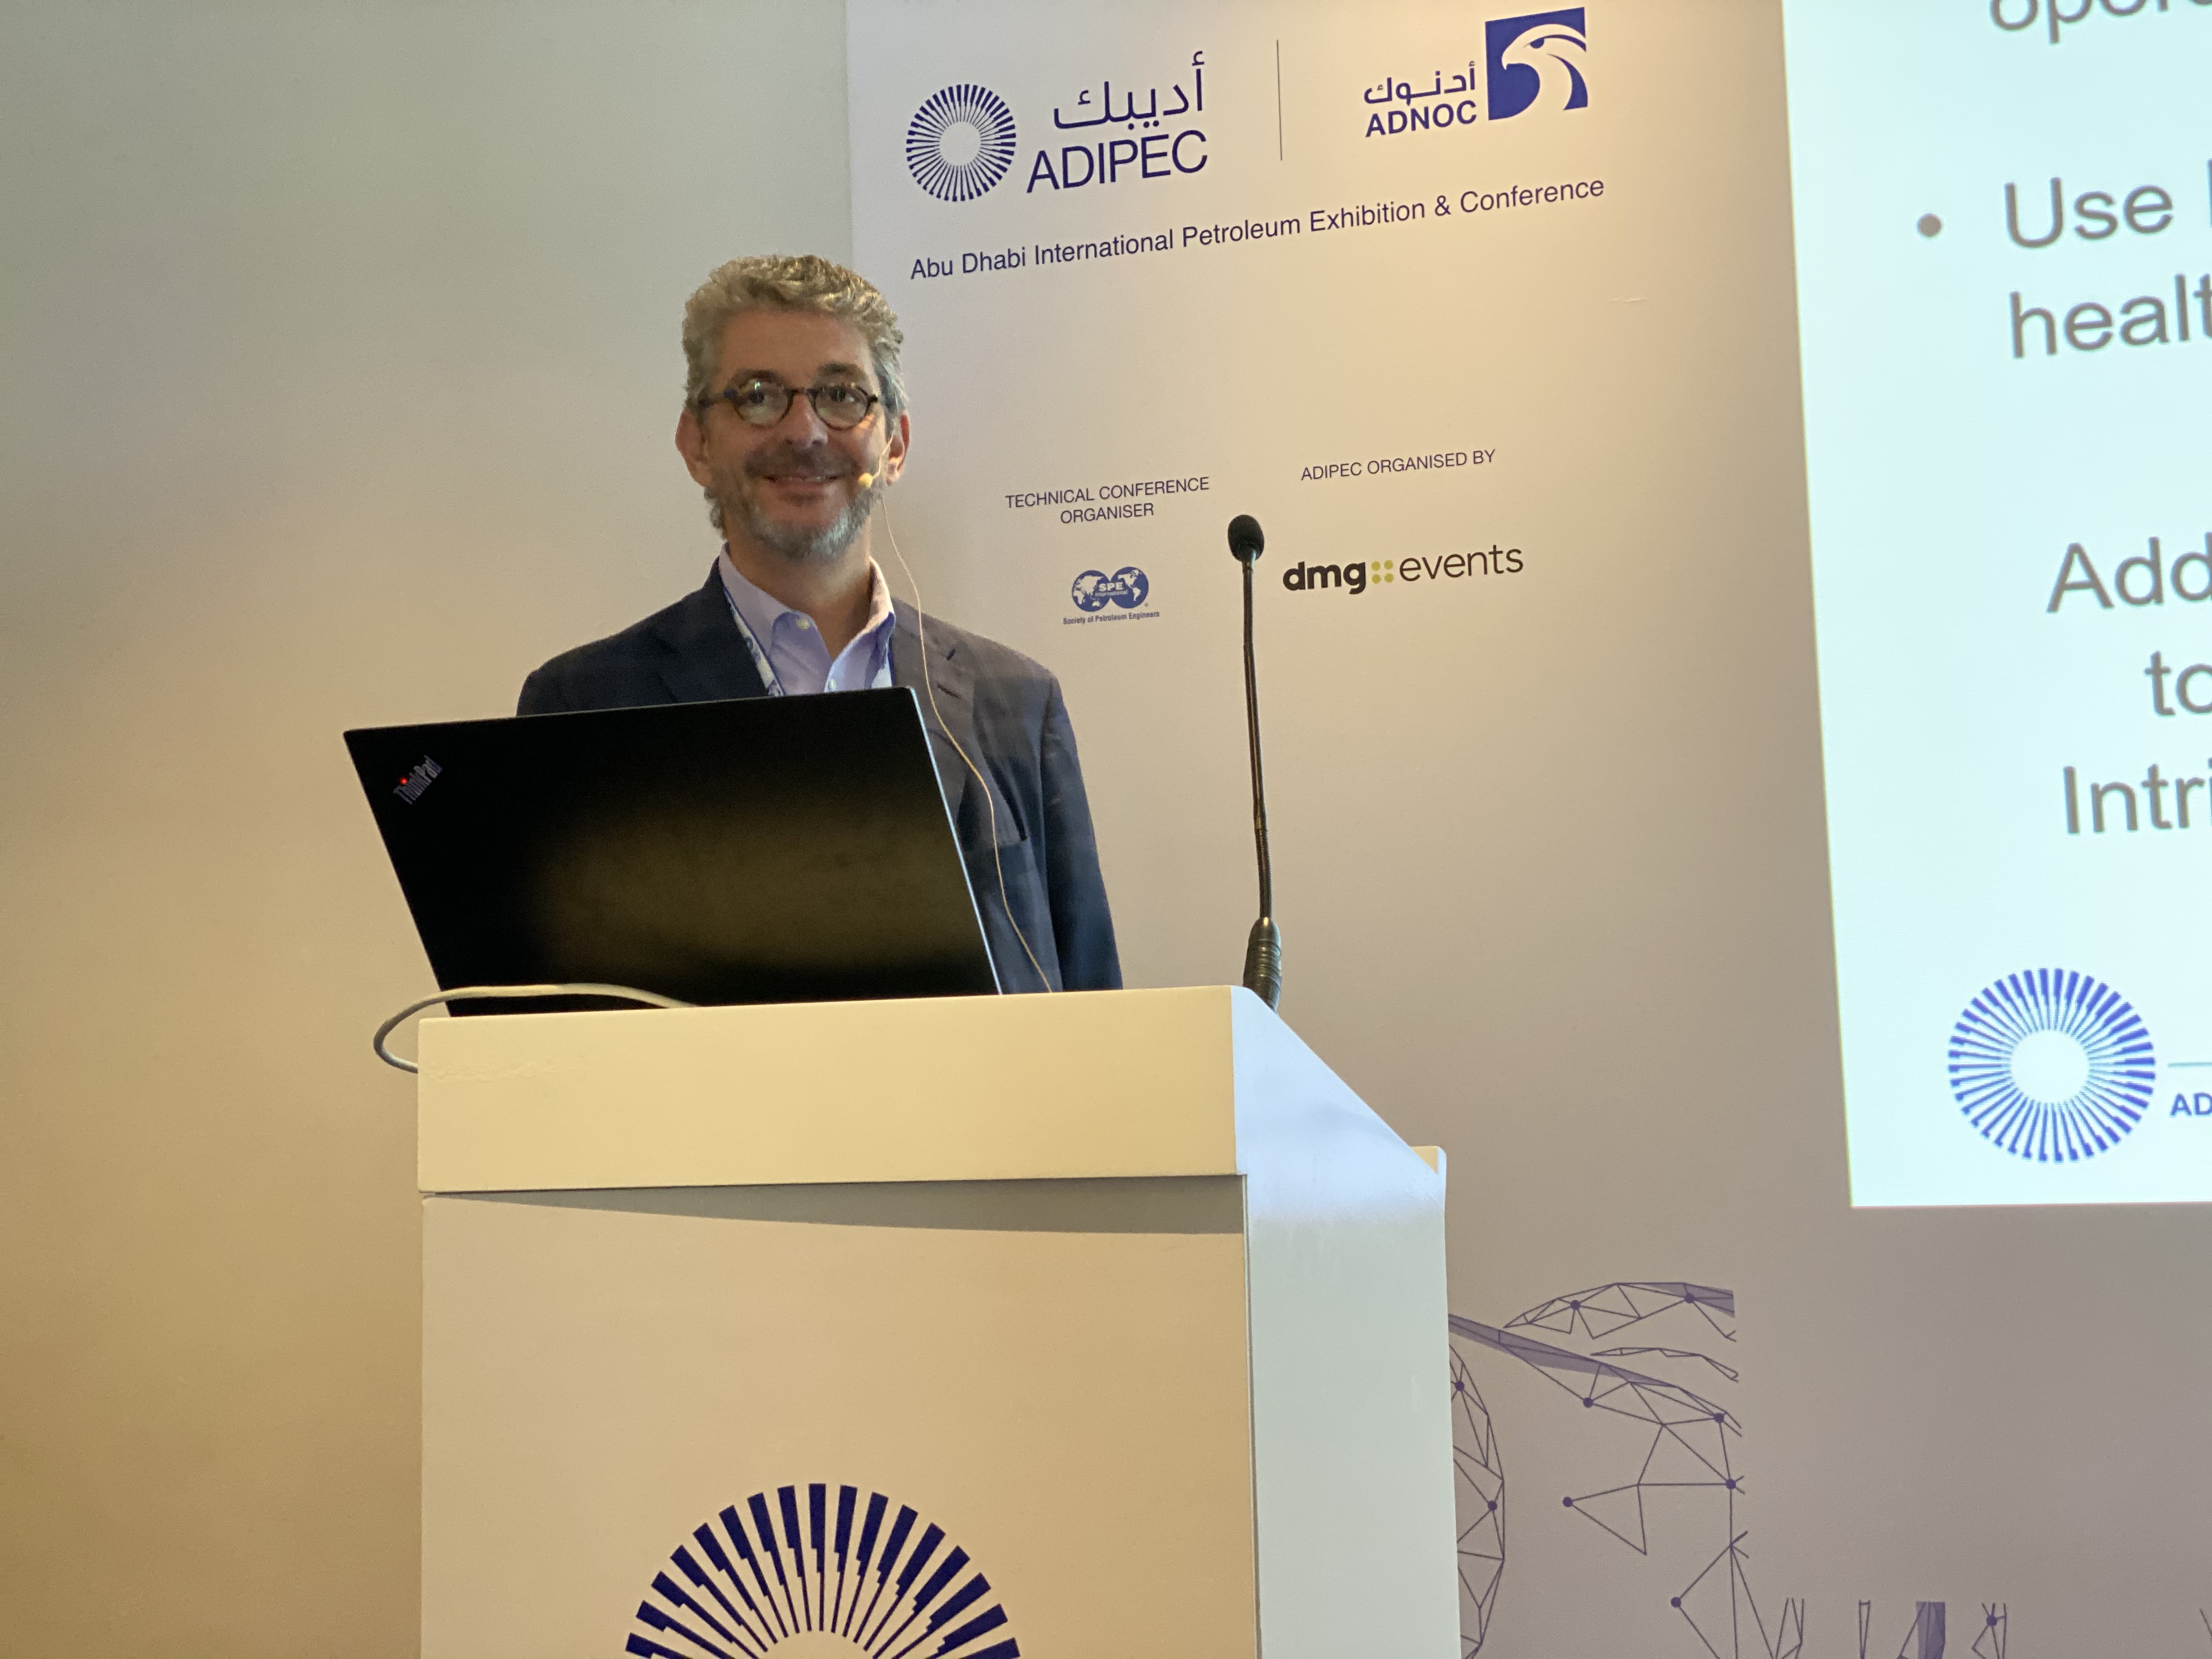 Aegex CEO Speaks at ADIPEC 2019 about IoT Protecting Assets and Improving Safety in Oil & Gas